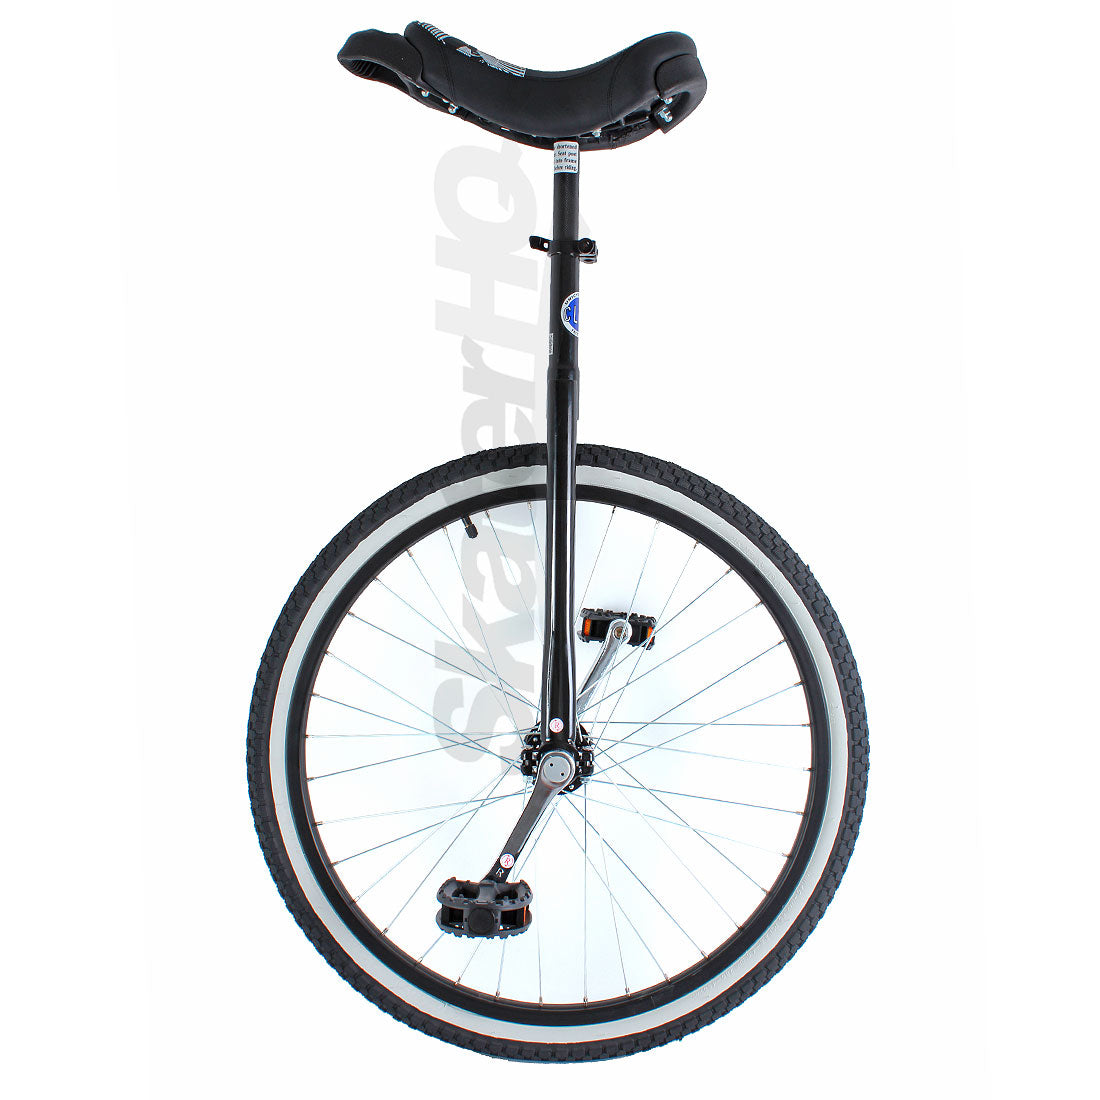 Club Freestyle 24inch Unicycle - Black Other Fun Toys